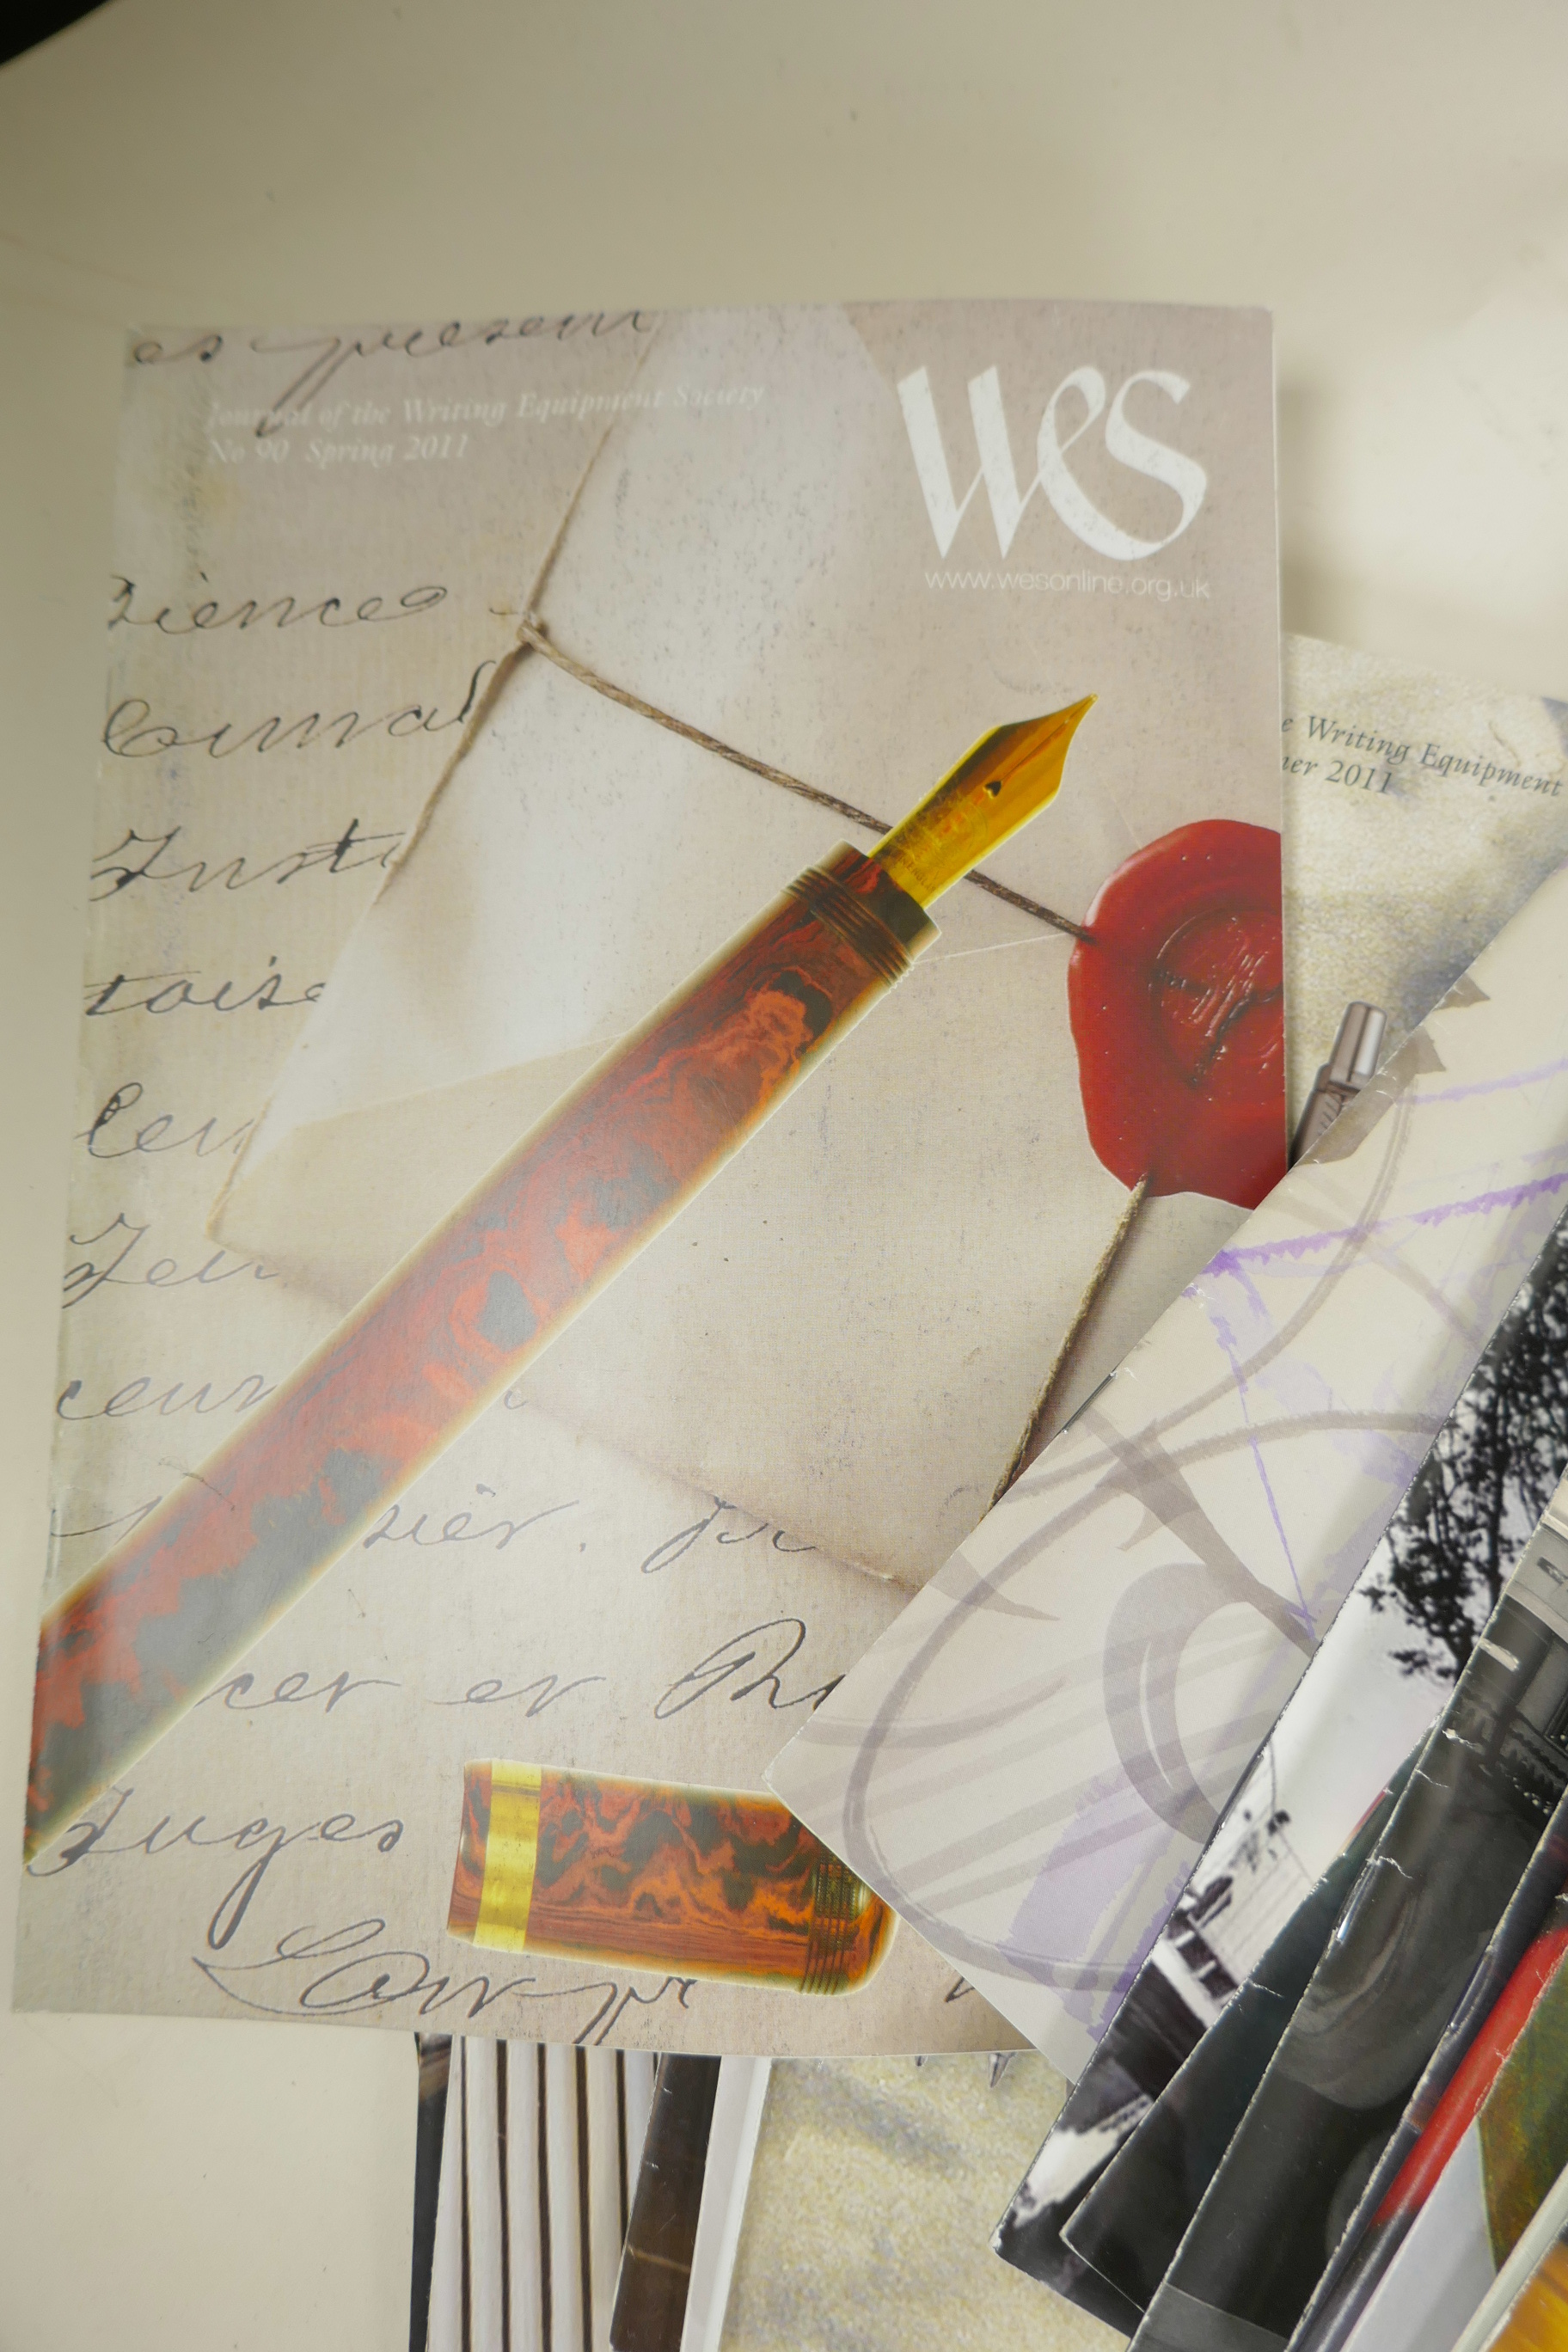 A large collection of the 'Journal of the Writing Equipment Society' magazines, with issues - Image 5 of 6